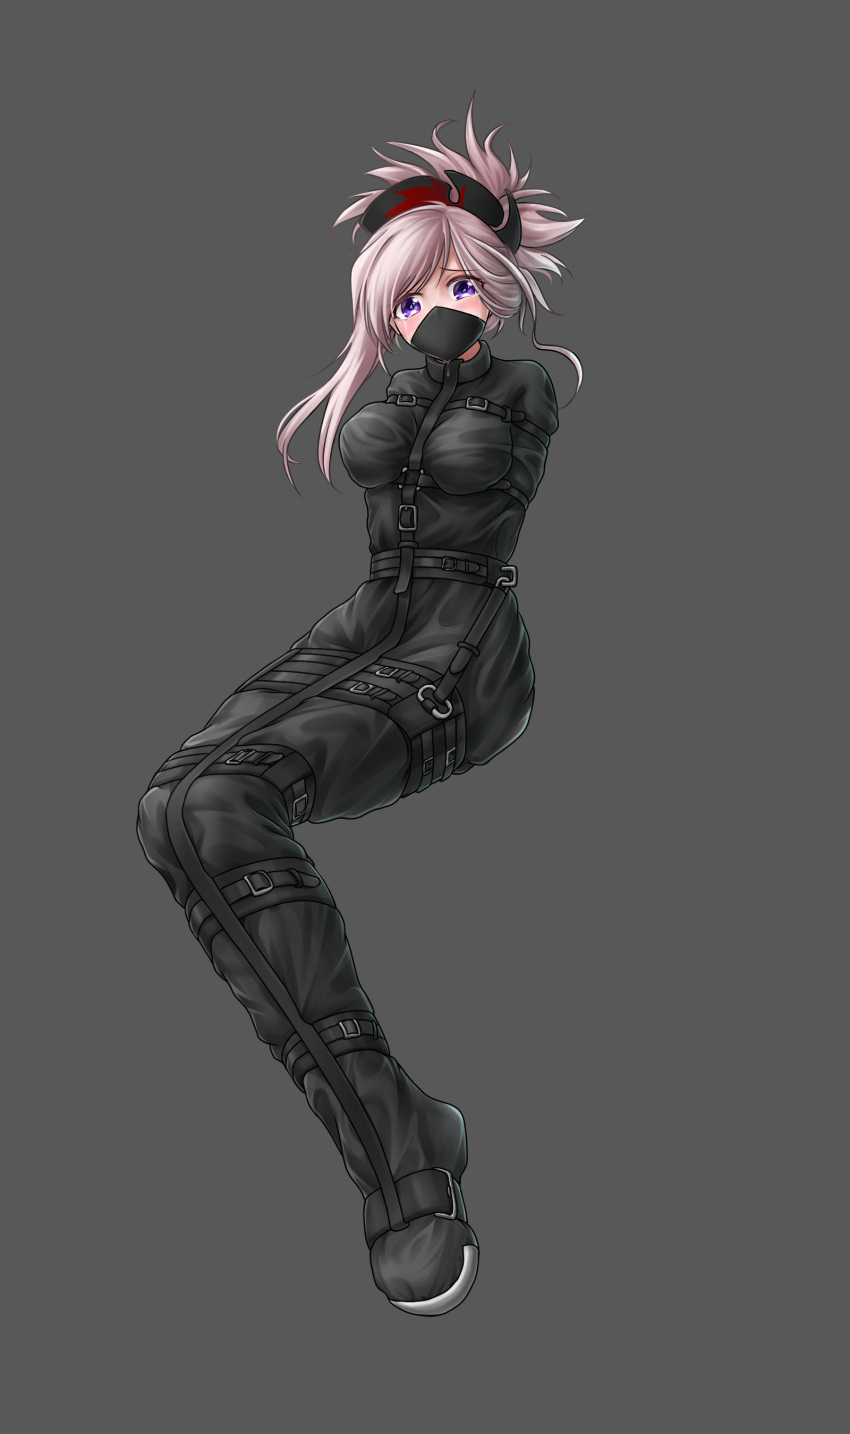 1girl 971197253 absurdres asymmetrical_hair bdsm belt_buckle bodysuit bondage bound buckle cloth_gag eyebrows_visible_through_hair face_mask fate/grand_order fate_(series) full_body gag gagged grey_background highres improvised_gag mask miyamoto_musashi_(fate/grand_order) over_the_nose_gag pink_hair restrained solo tears tied_up violet_eyes